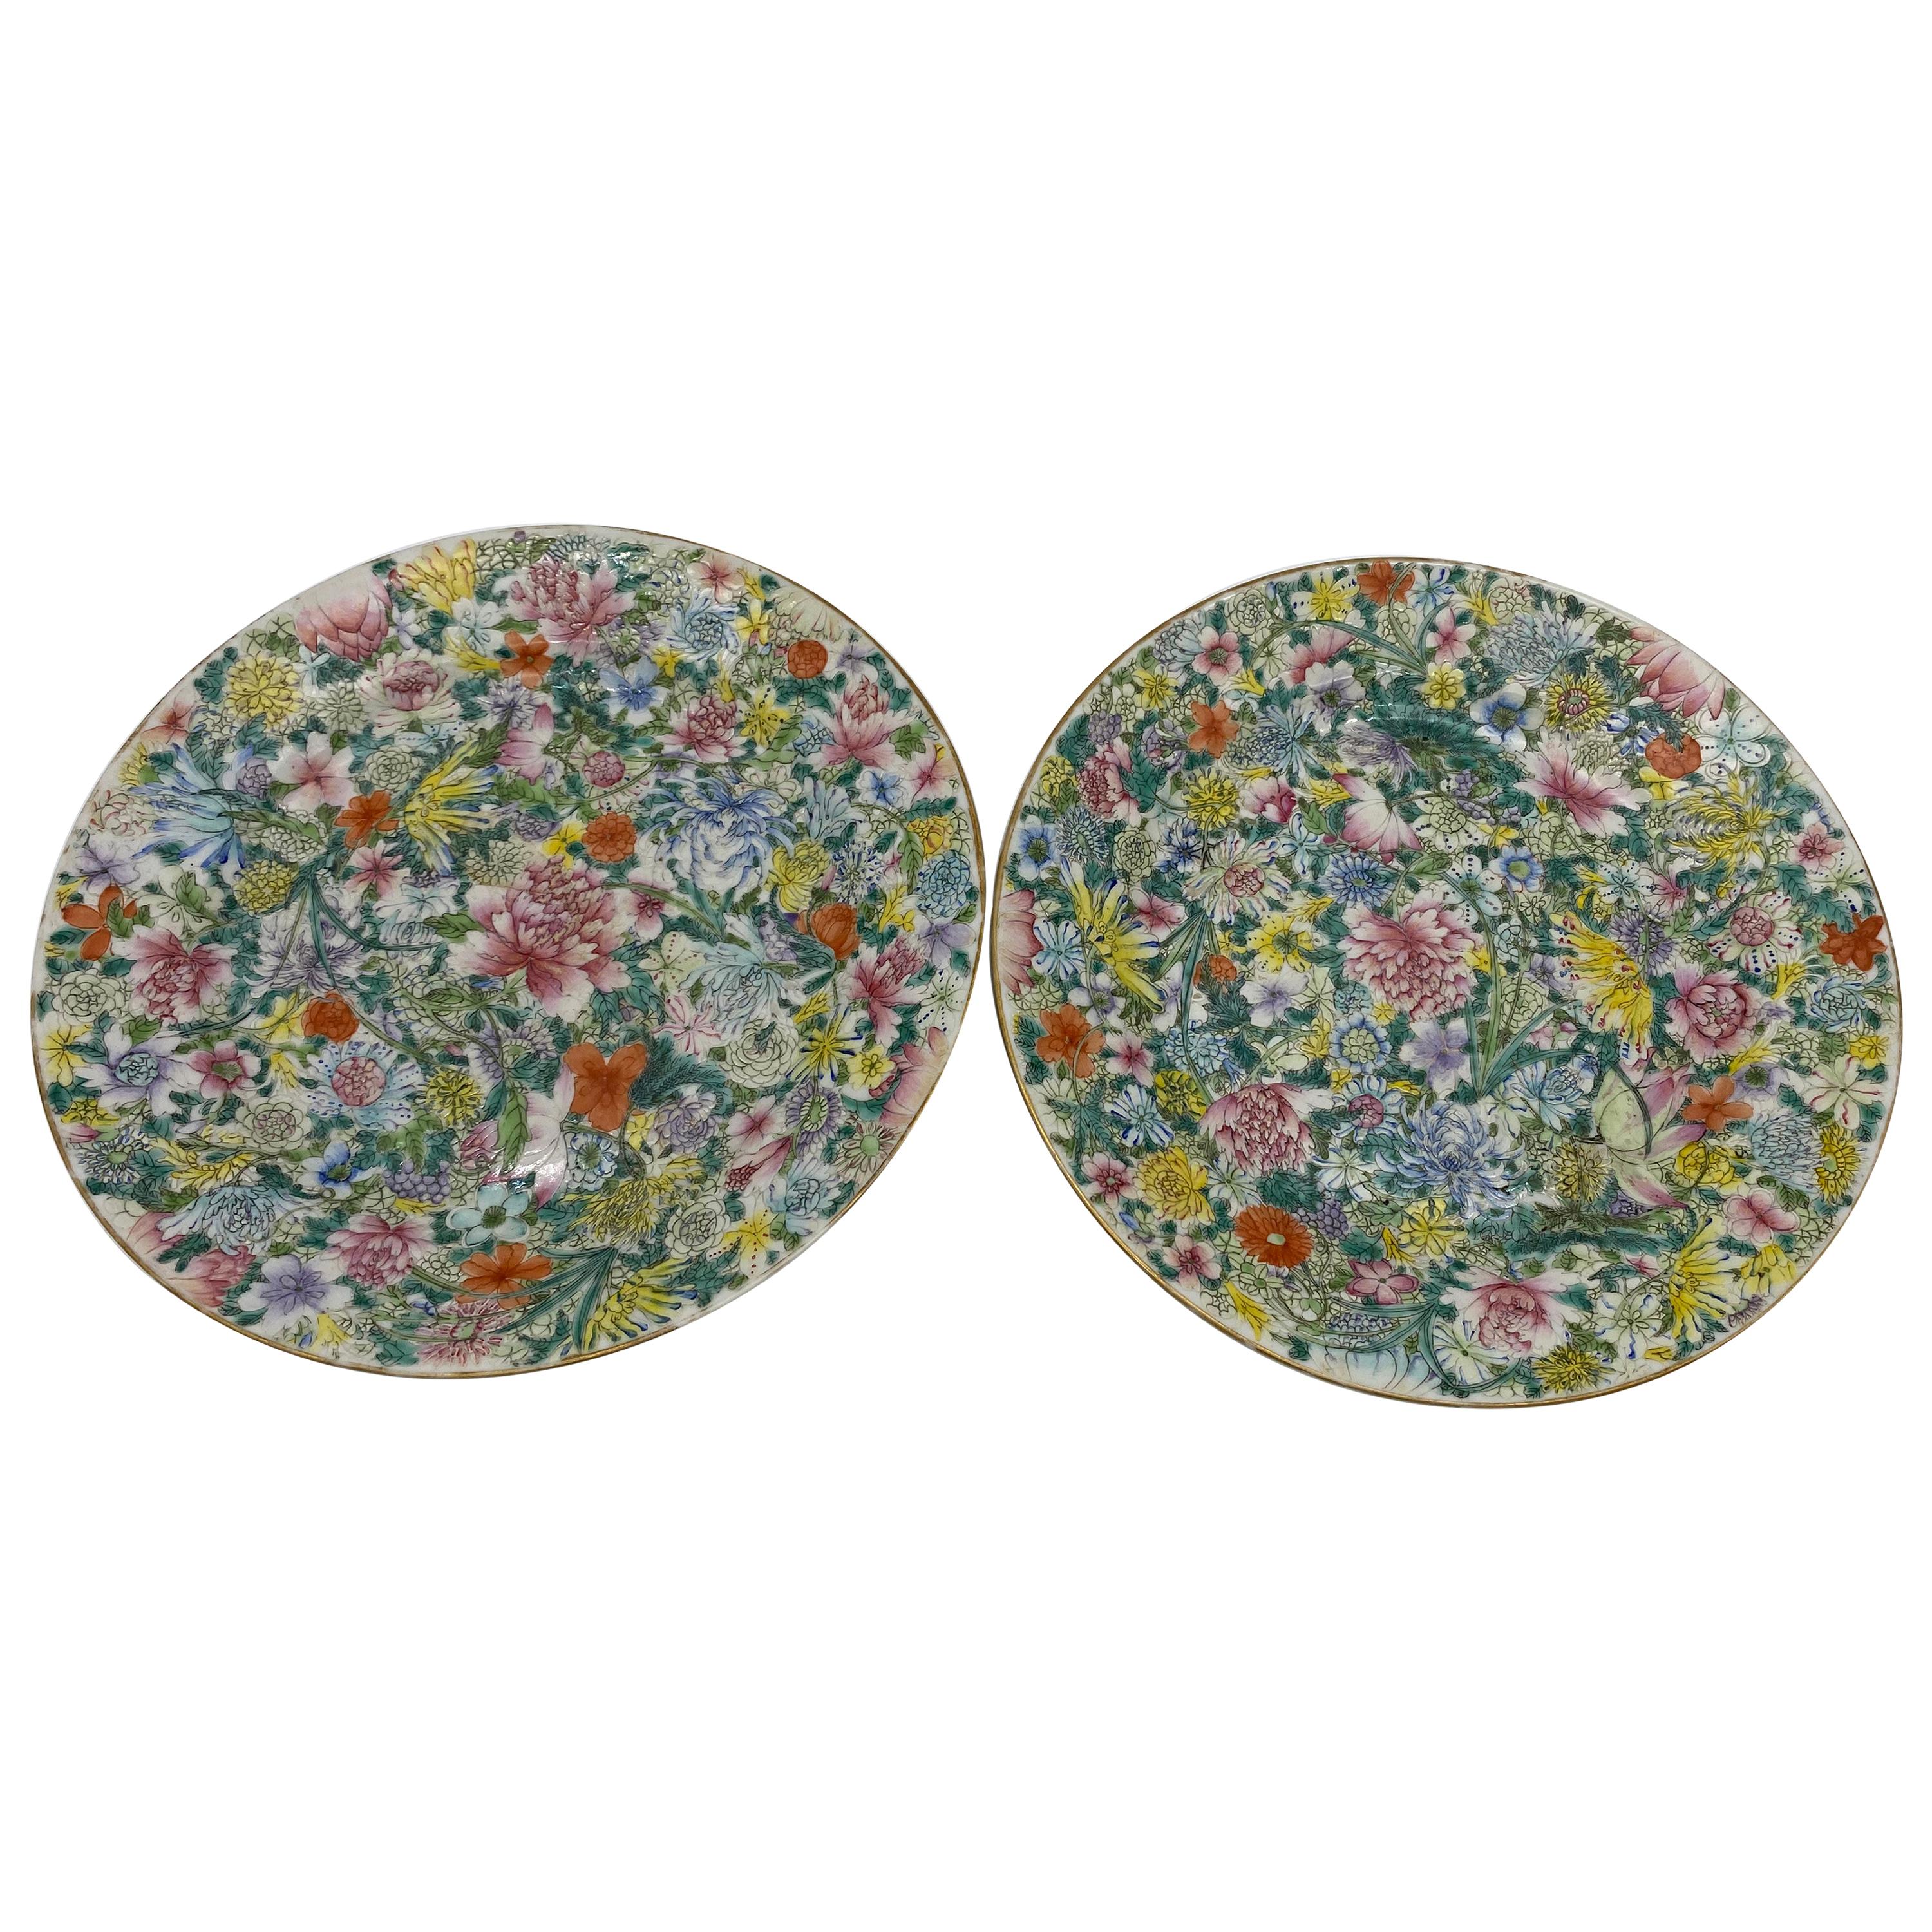 Pair of 19th Century Chinese Flower-Blossom Porcelain Plates For Sale